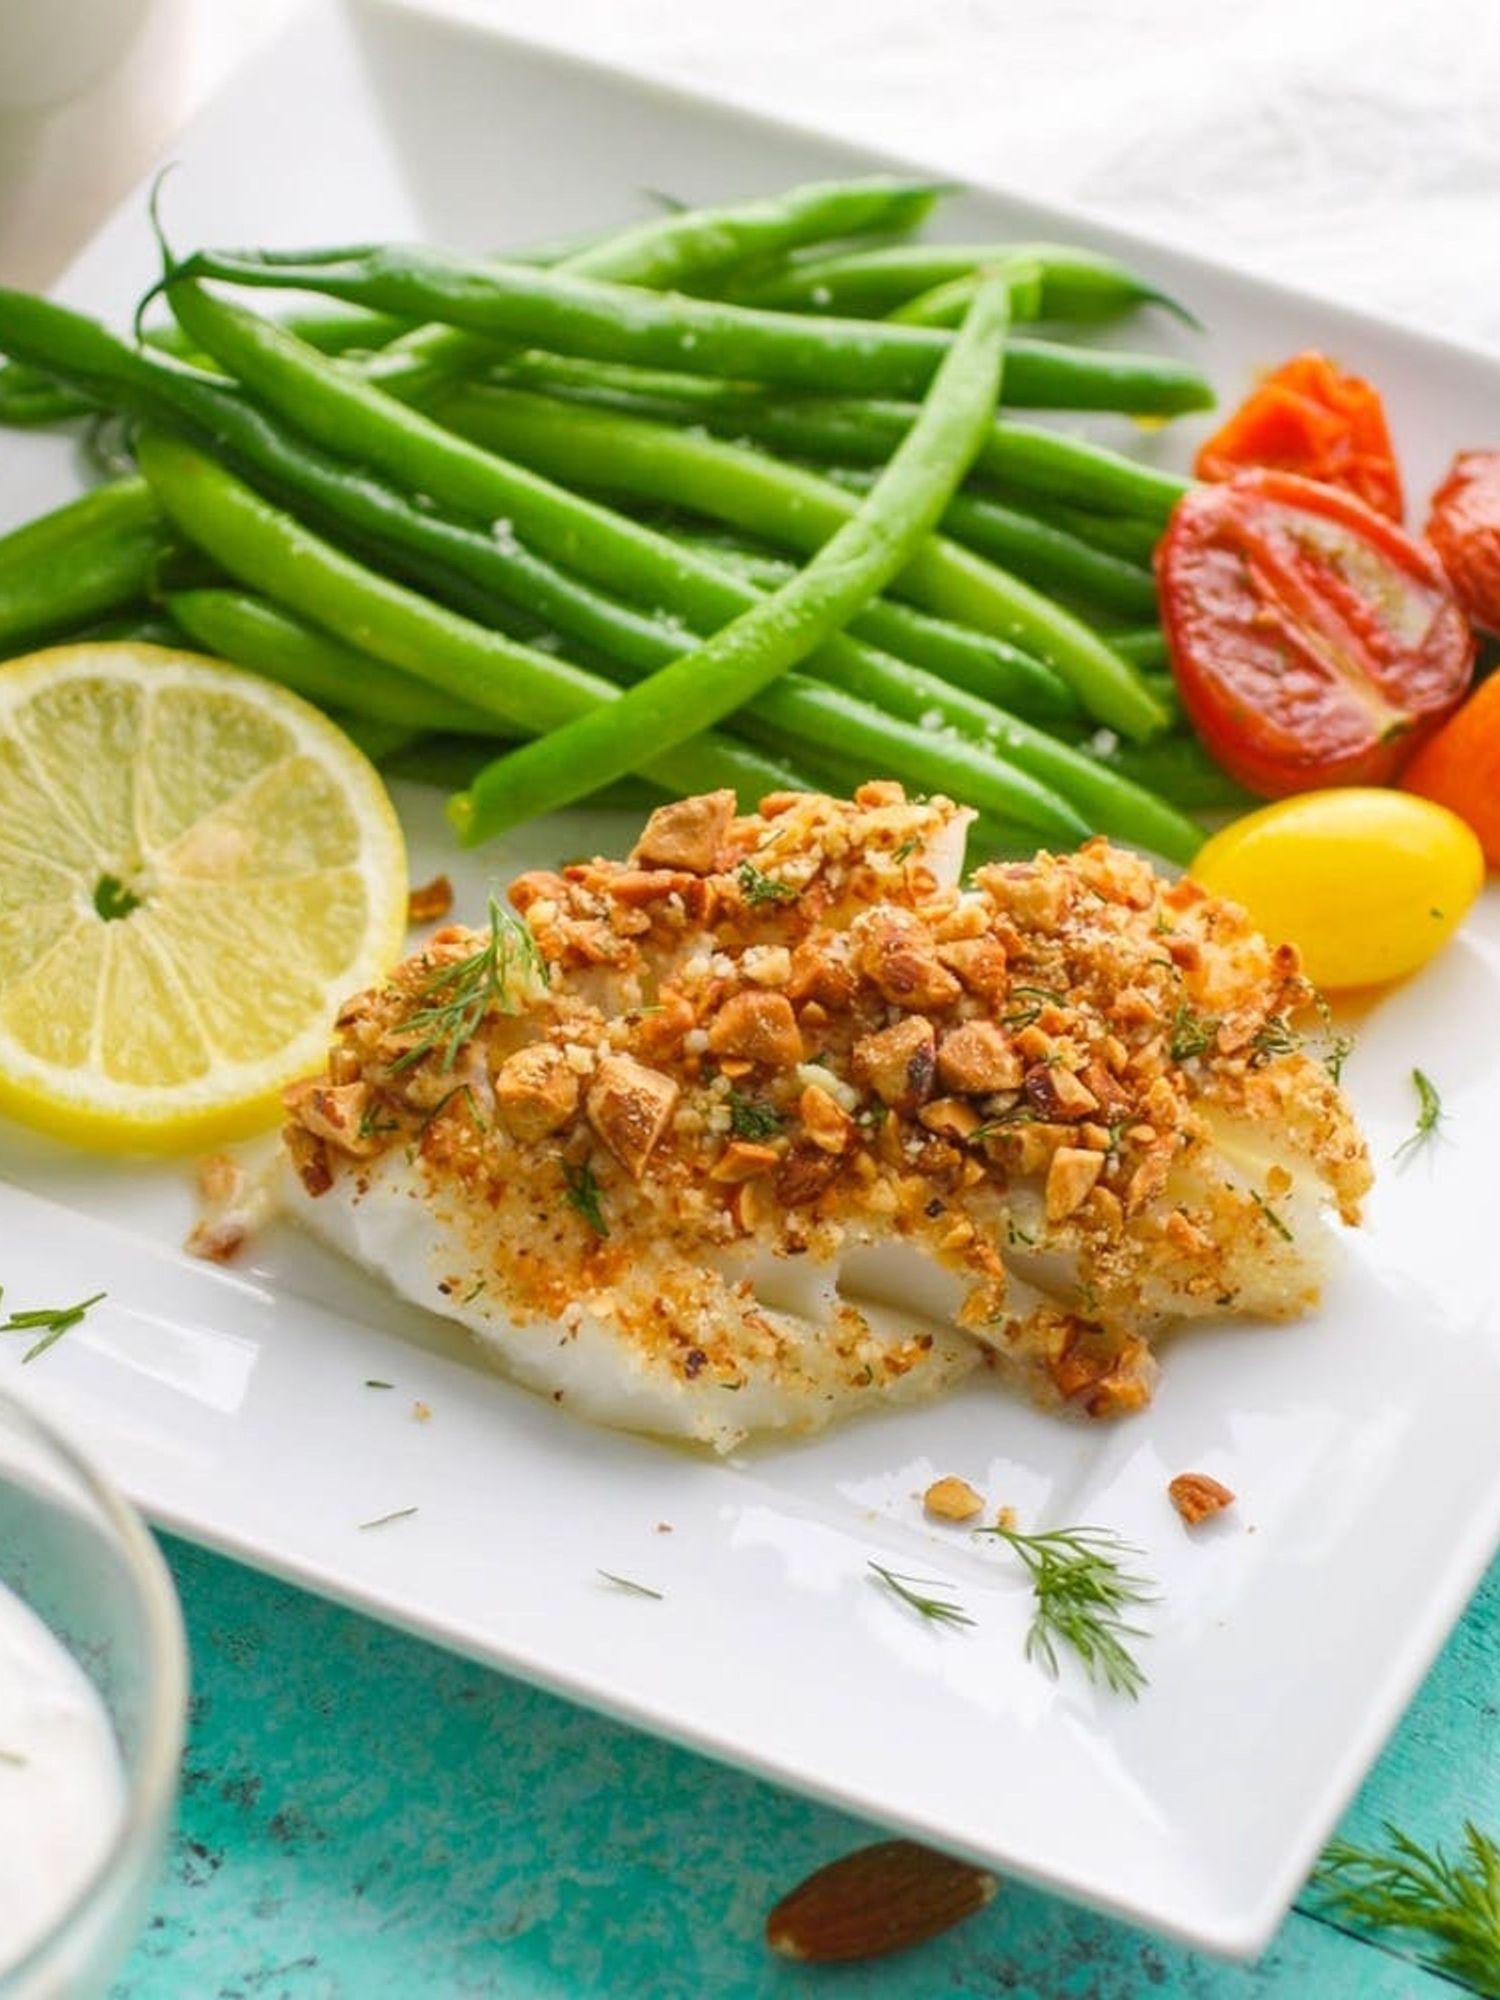 Baked Almond-Crusted Cod